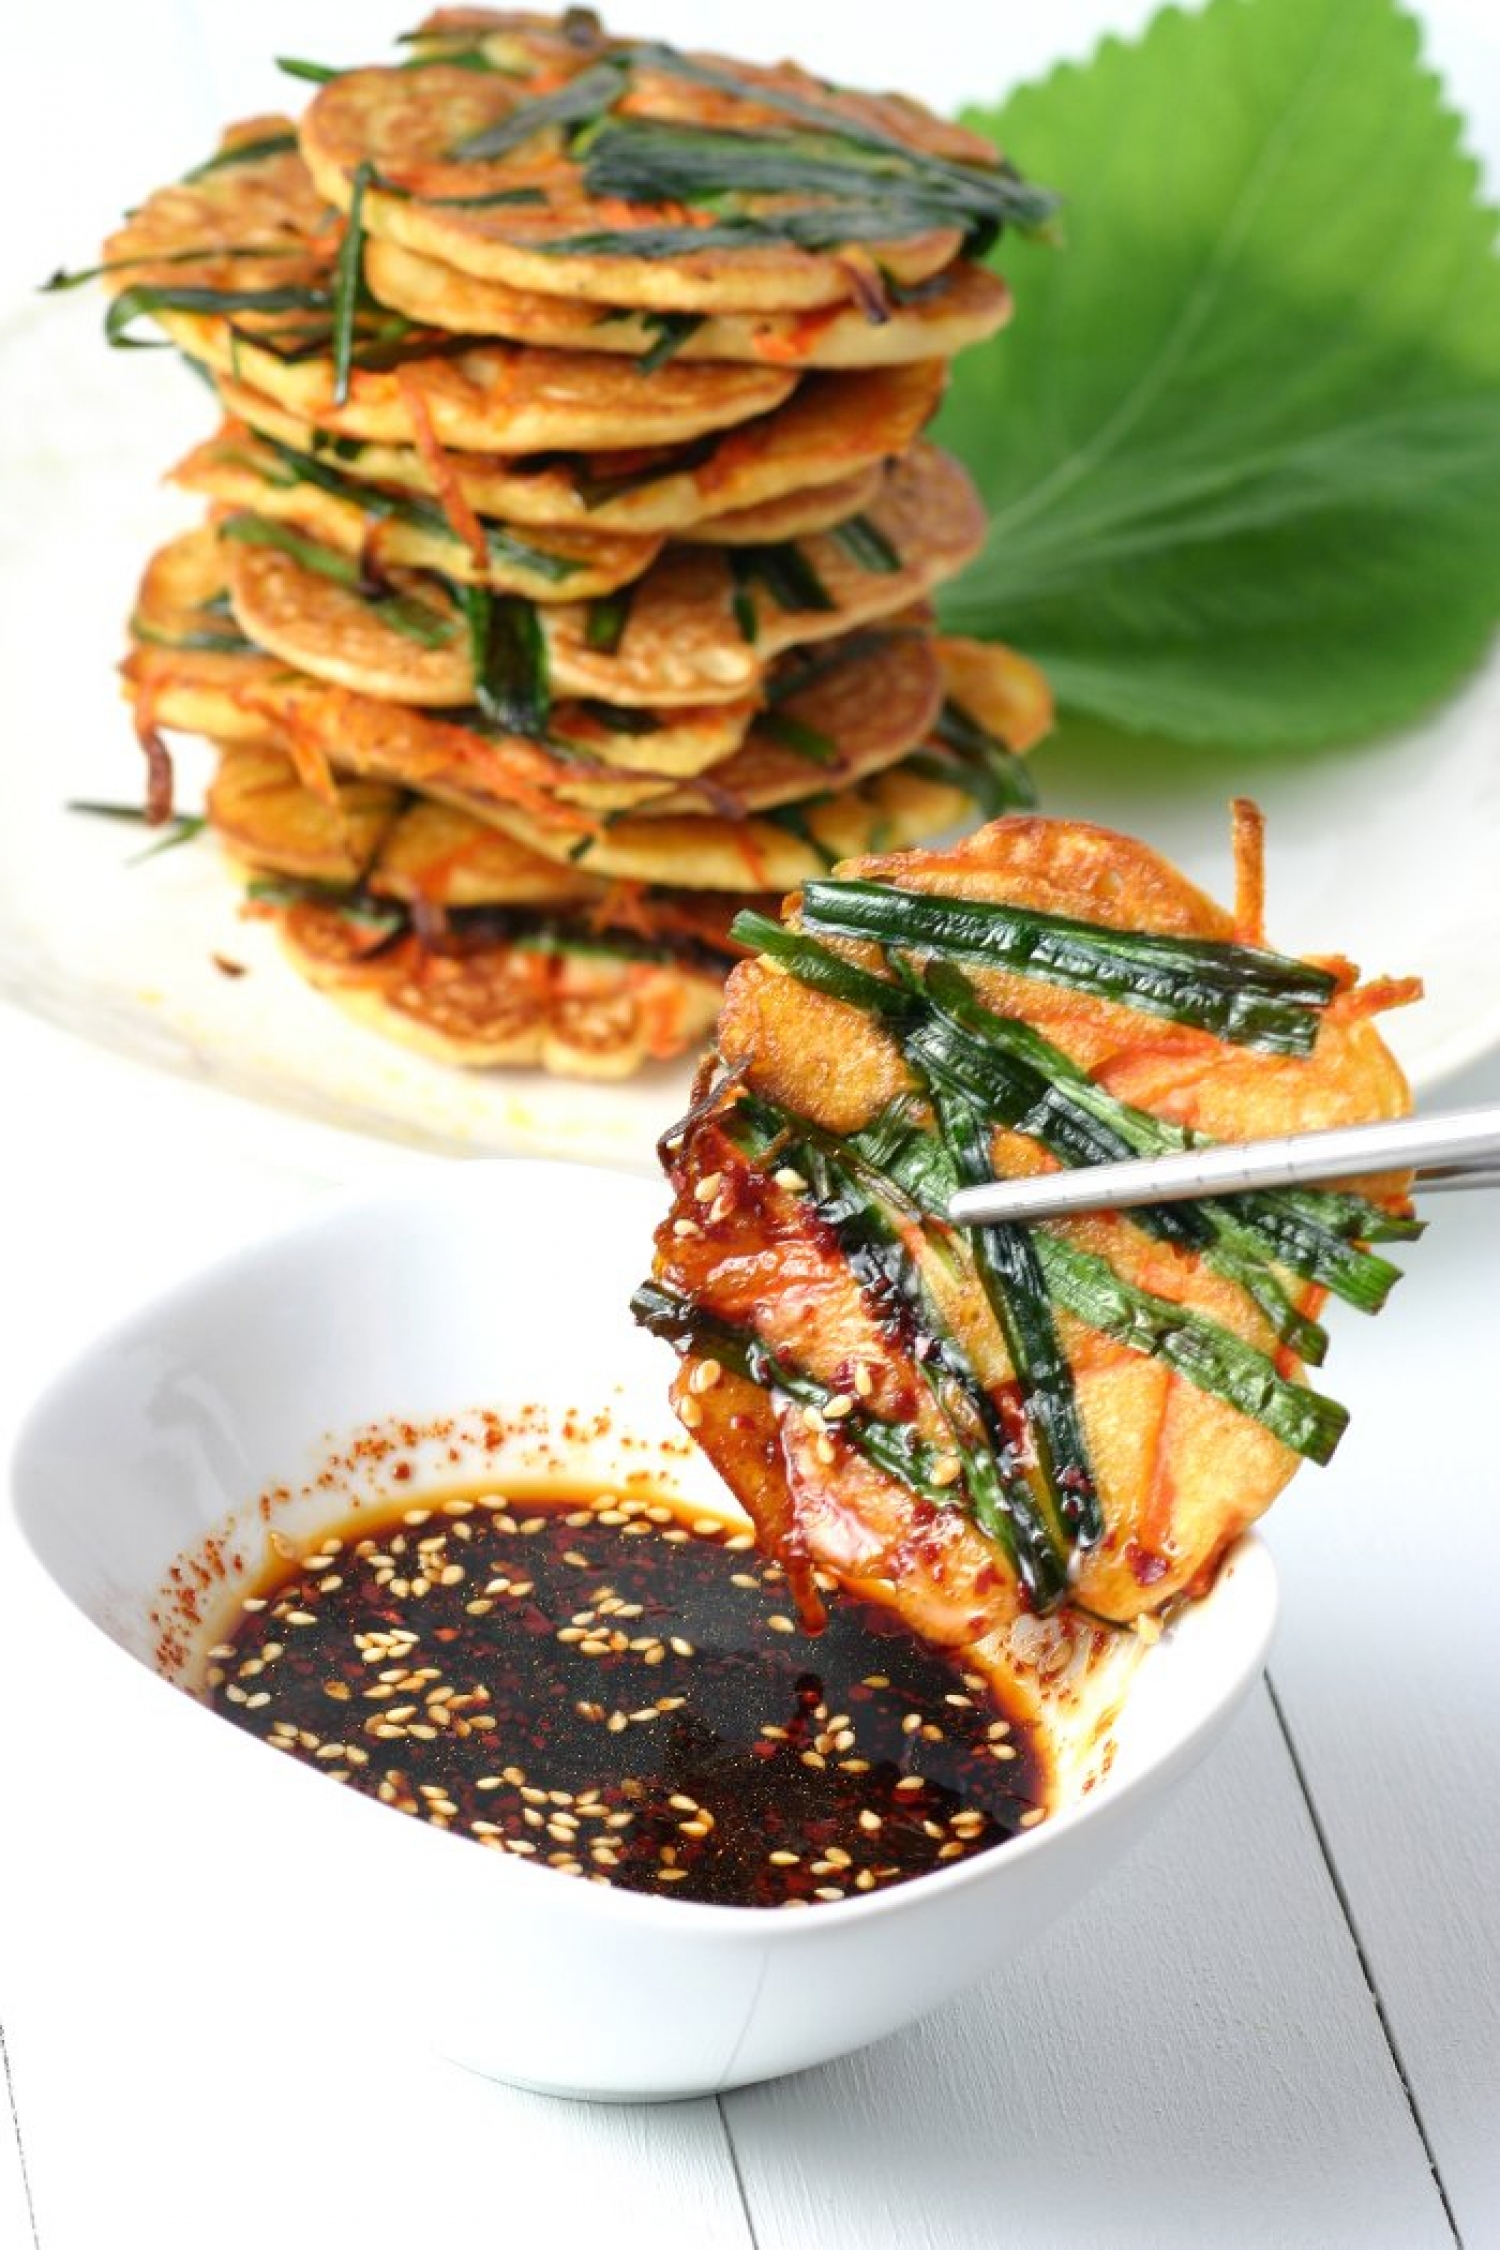 <p>To make these savory Korean-style pancakes packed with aromatic, authentic flavor, get your hands on some split mung beans, brown miso and rice flour. Served with a simple yet kicked-up dipping sauce, they'll make your taste buds travel to a delicious place. <a href="http://www.landsandflavors.com/korean-mung-bean-pancakes/" rel="noopener">Get the recipe here.</a></p>